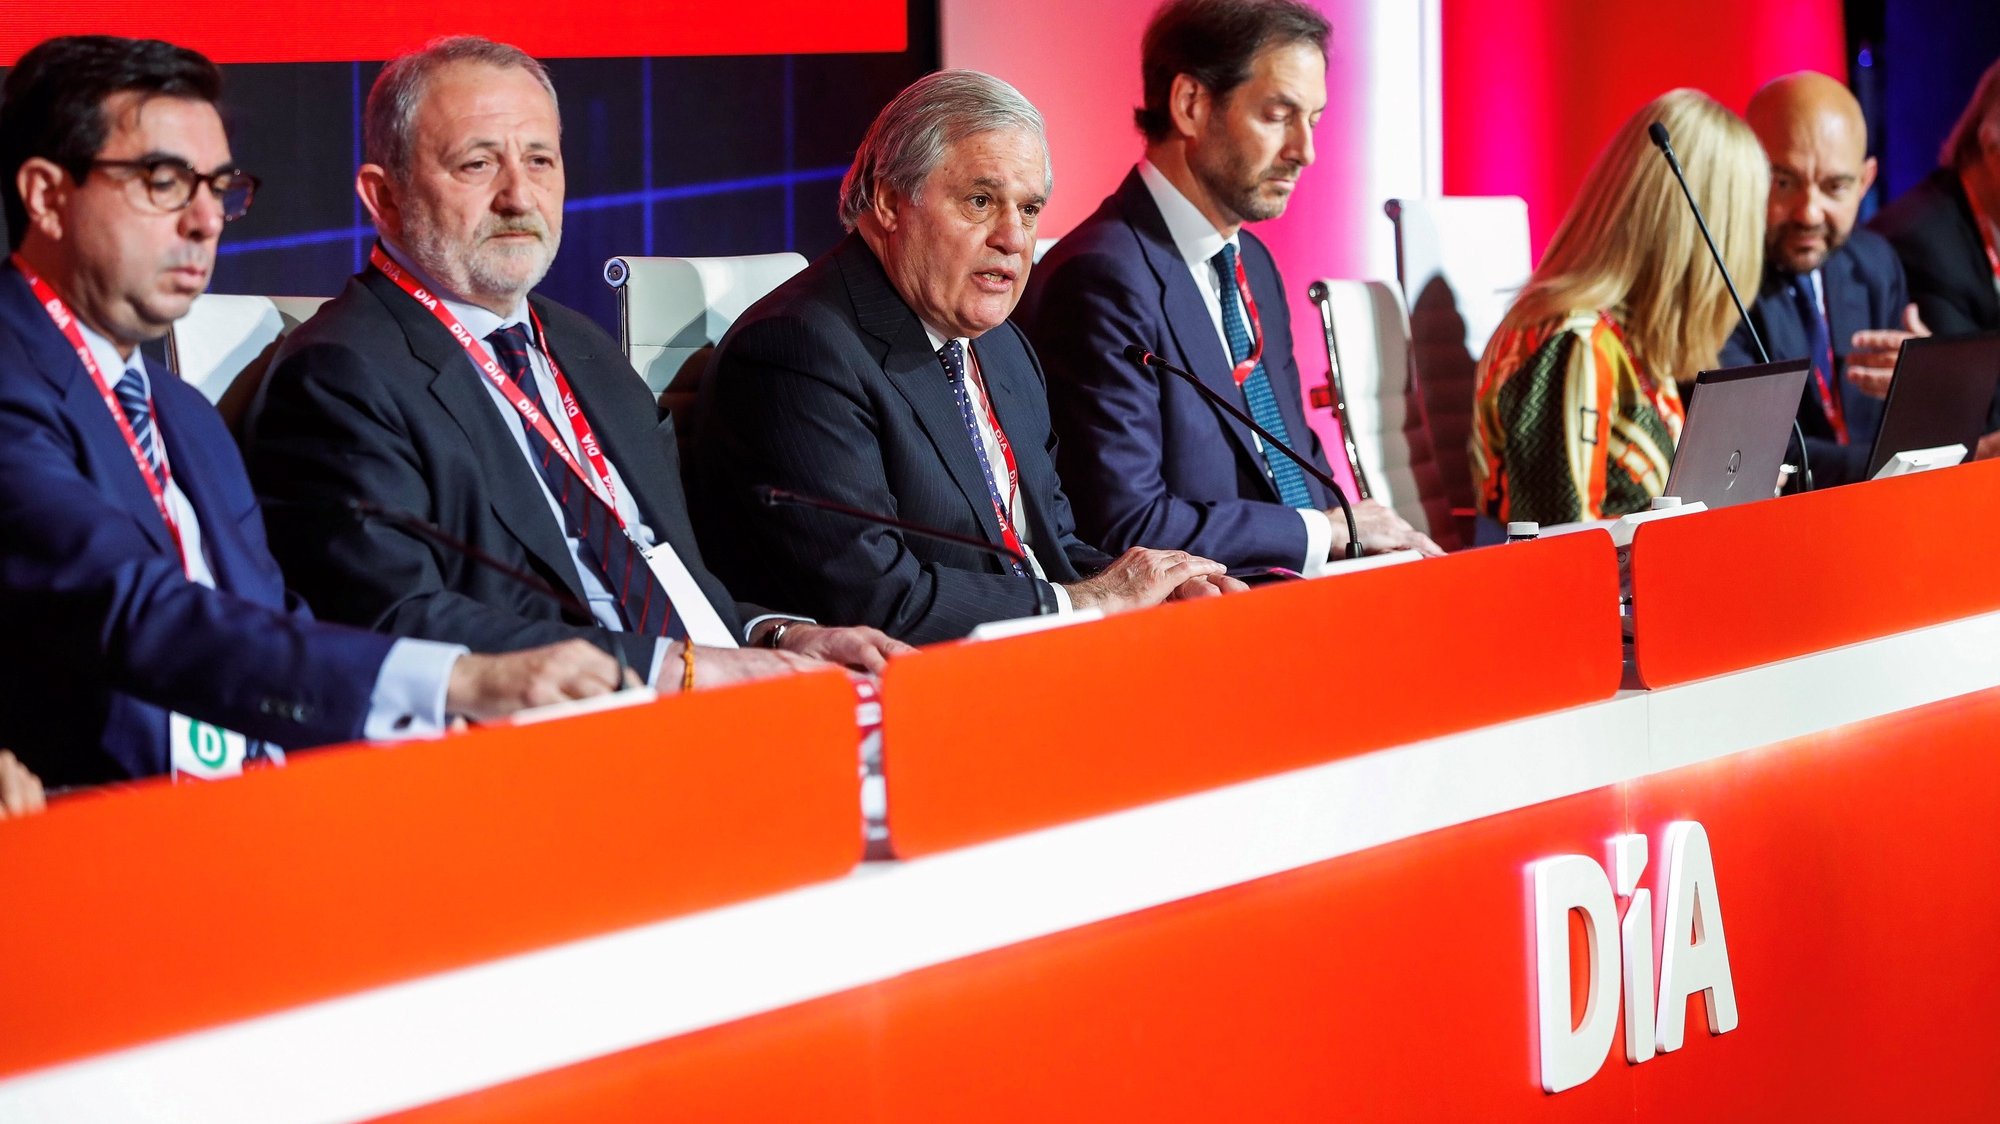 epa07450162 Richard Golding (C), Second Vice Chairman of the Board of Spanish supermarket chain DIA group, delivers a speech during the general meeting of shareholders of the company in Madrid, Spain, 20 March 2019. The general meeting is held amid a deep crisis of the retail group due to financial problems, the fall in sales, accounting irregularities and constant changes in directive board. The company has 43,0000 workers among Spain, Portugal, Brazil and Argentina.  EPA/Emilio Naranjo